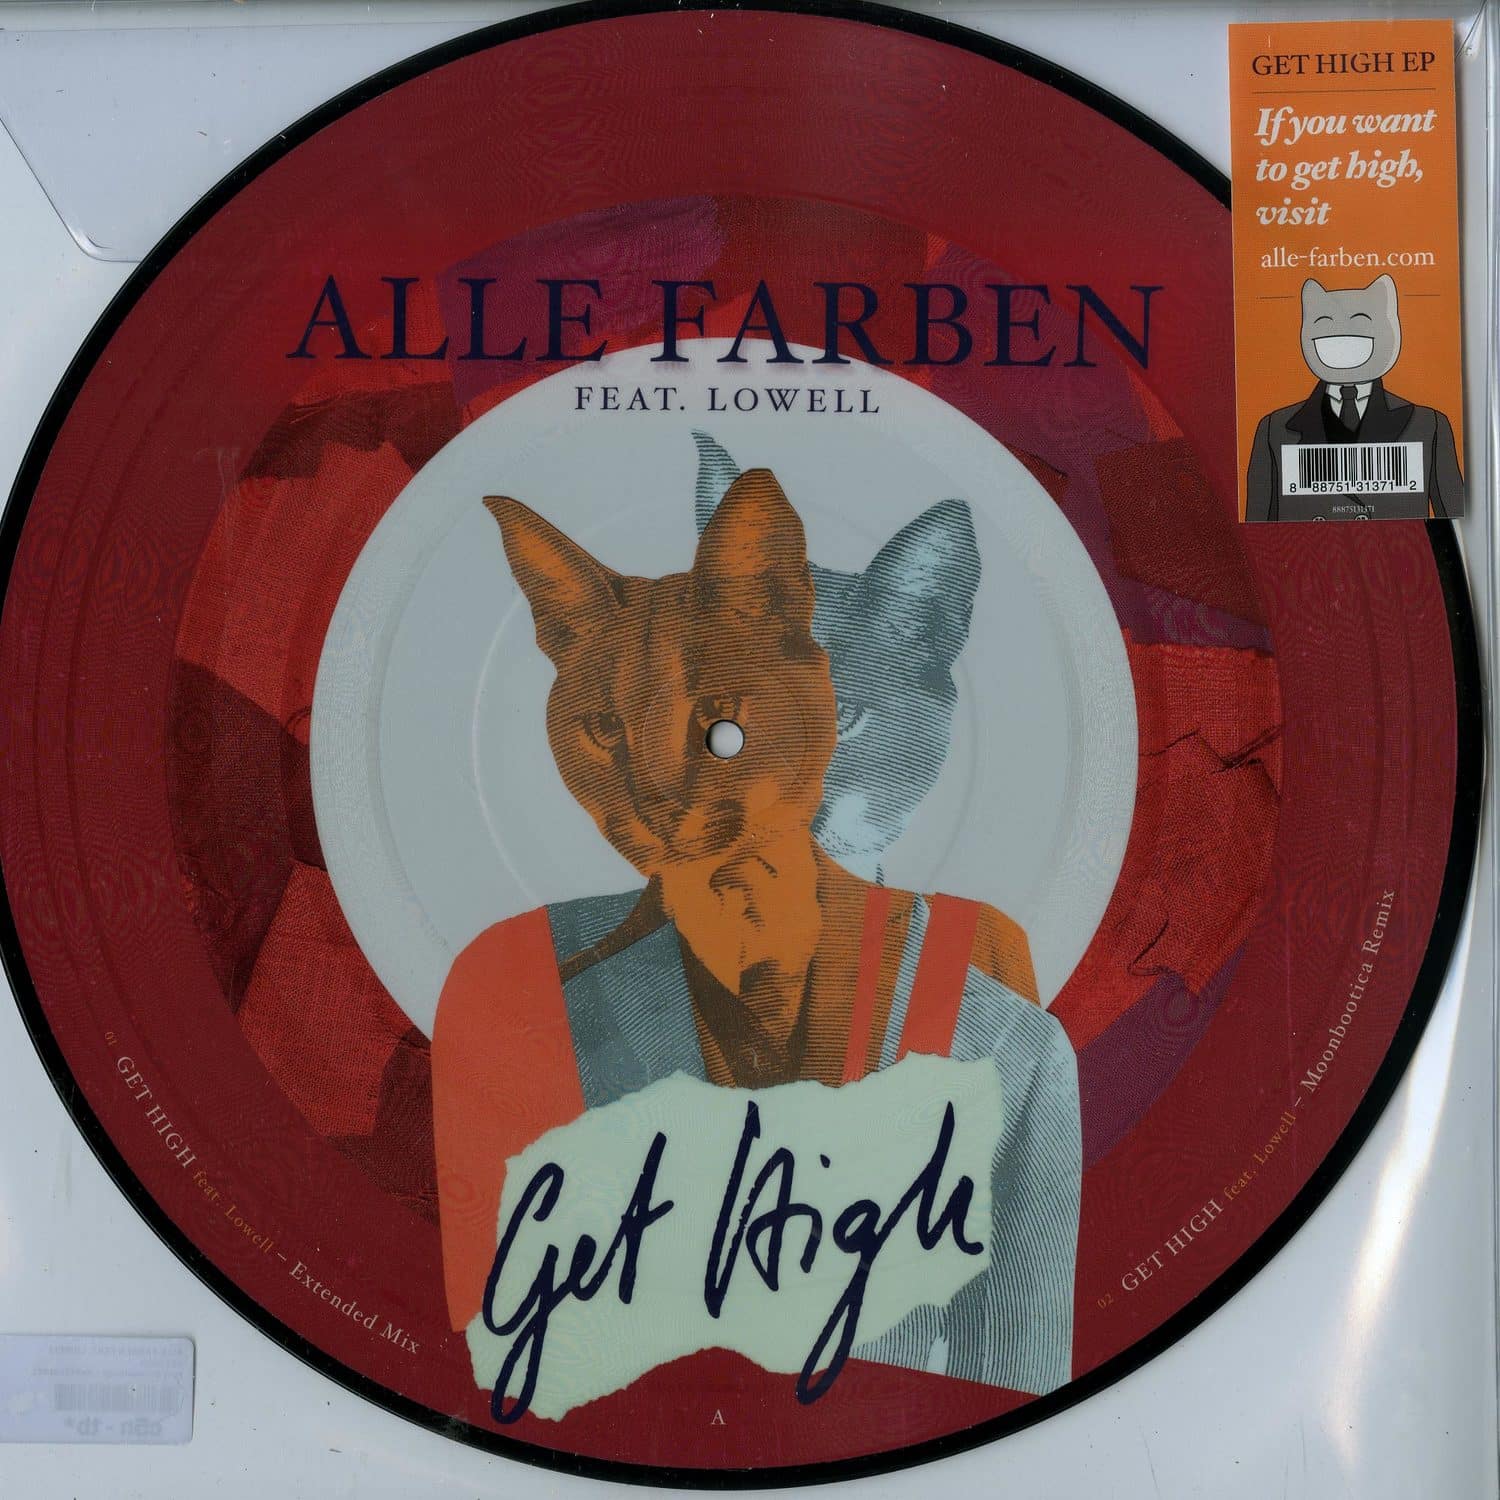 Alle Farben feat. Lowell - GET HIGH EP 